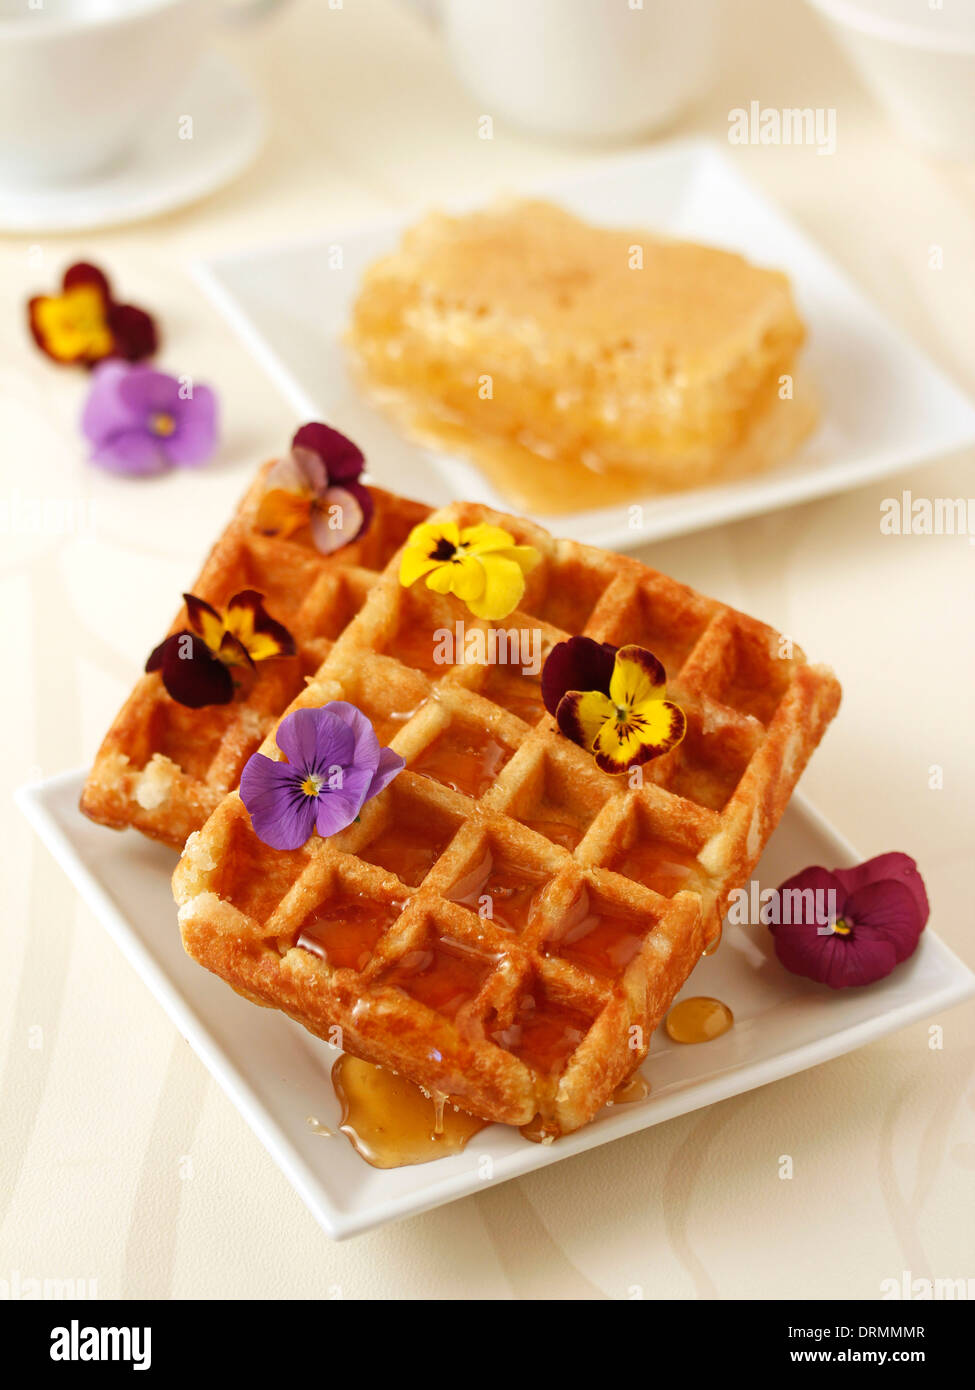 Waffles with honey and flowers. Recipe available. Stock Photo